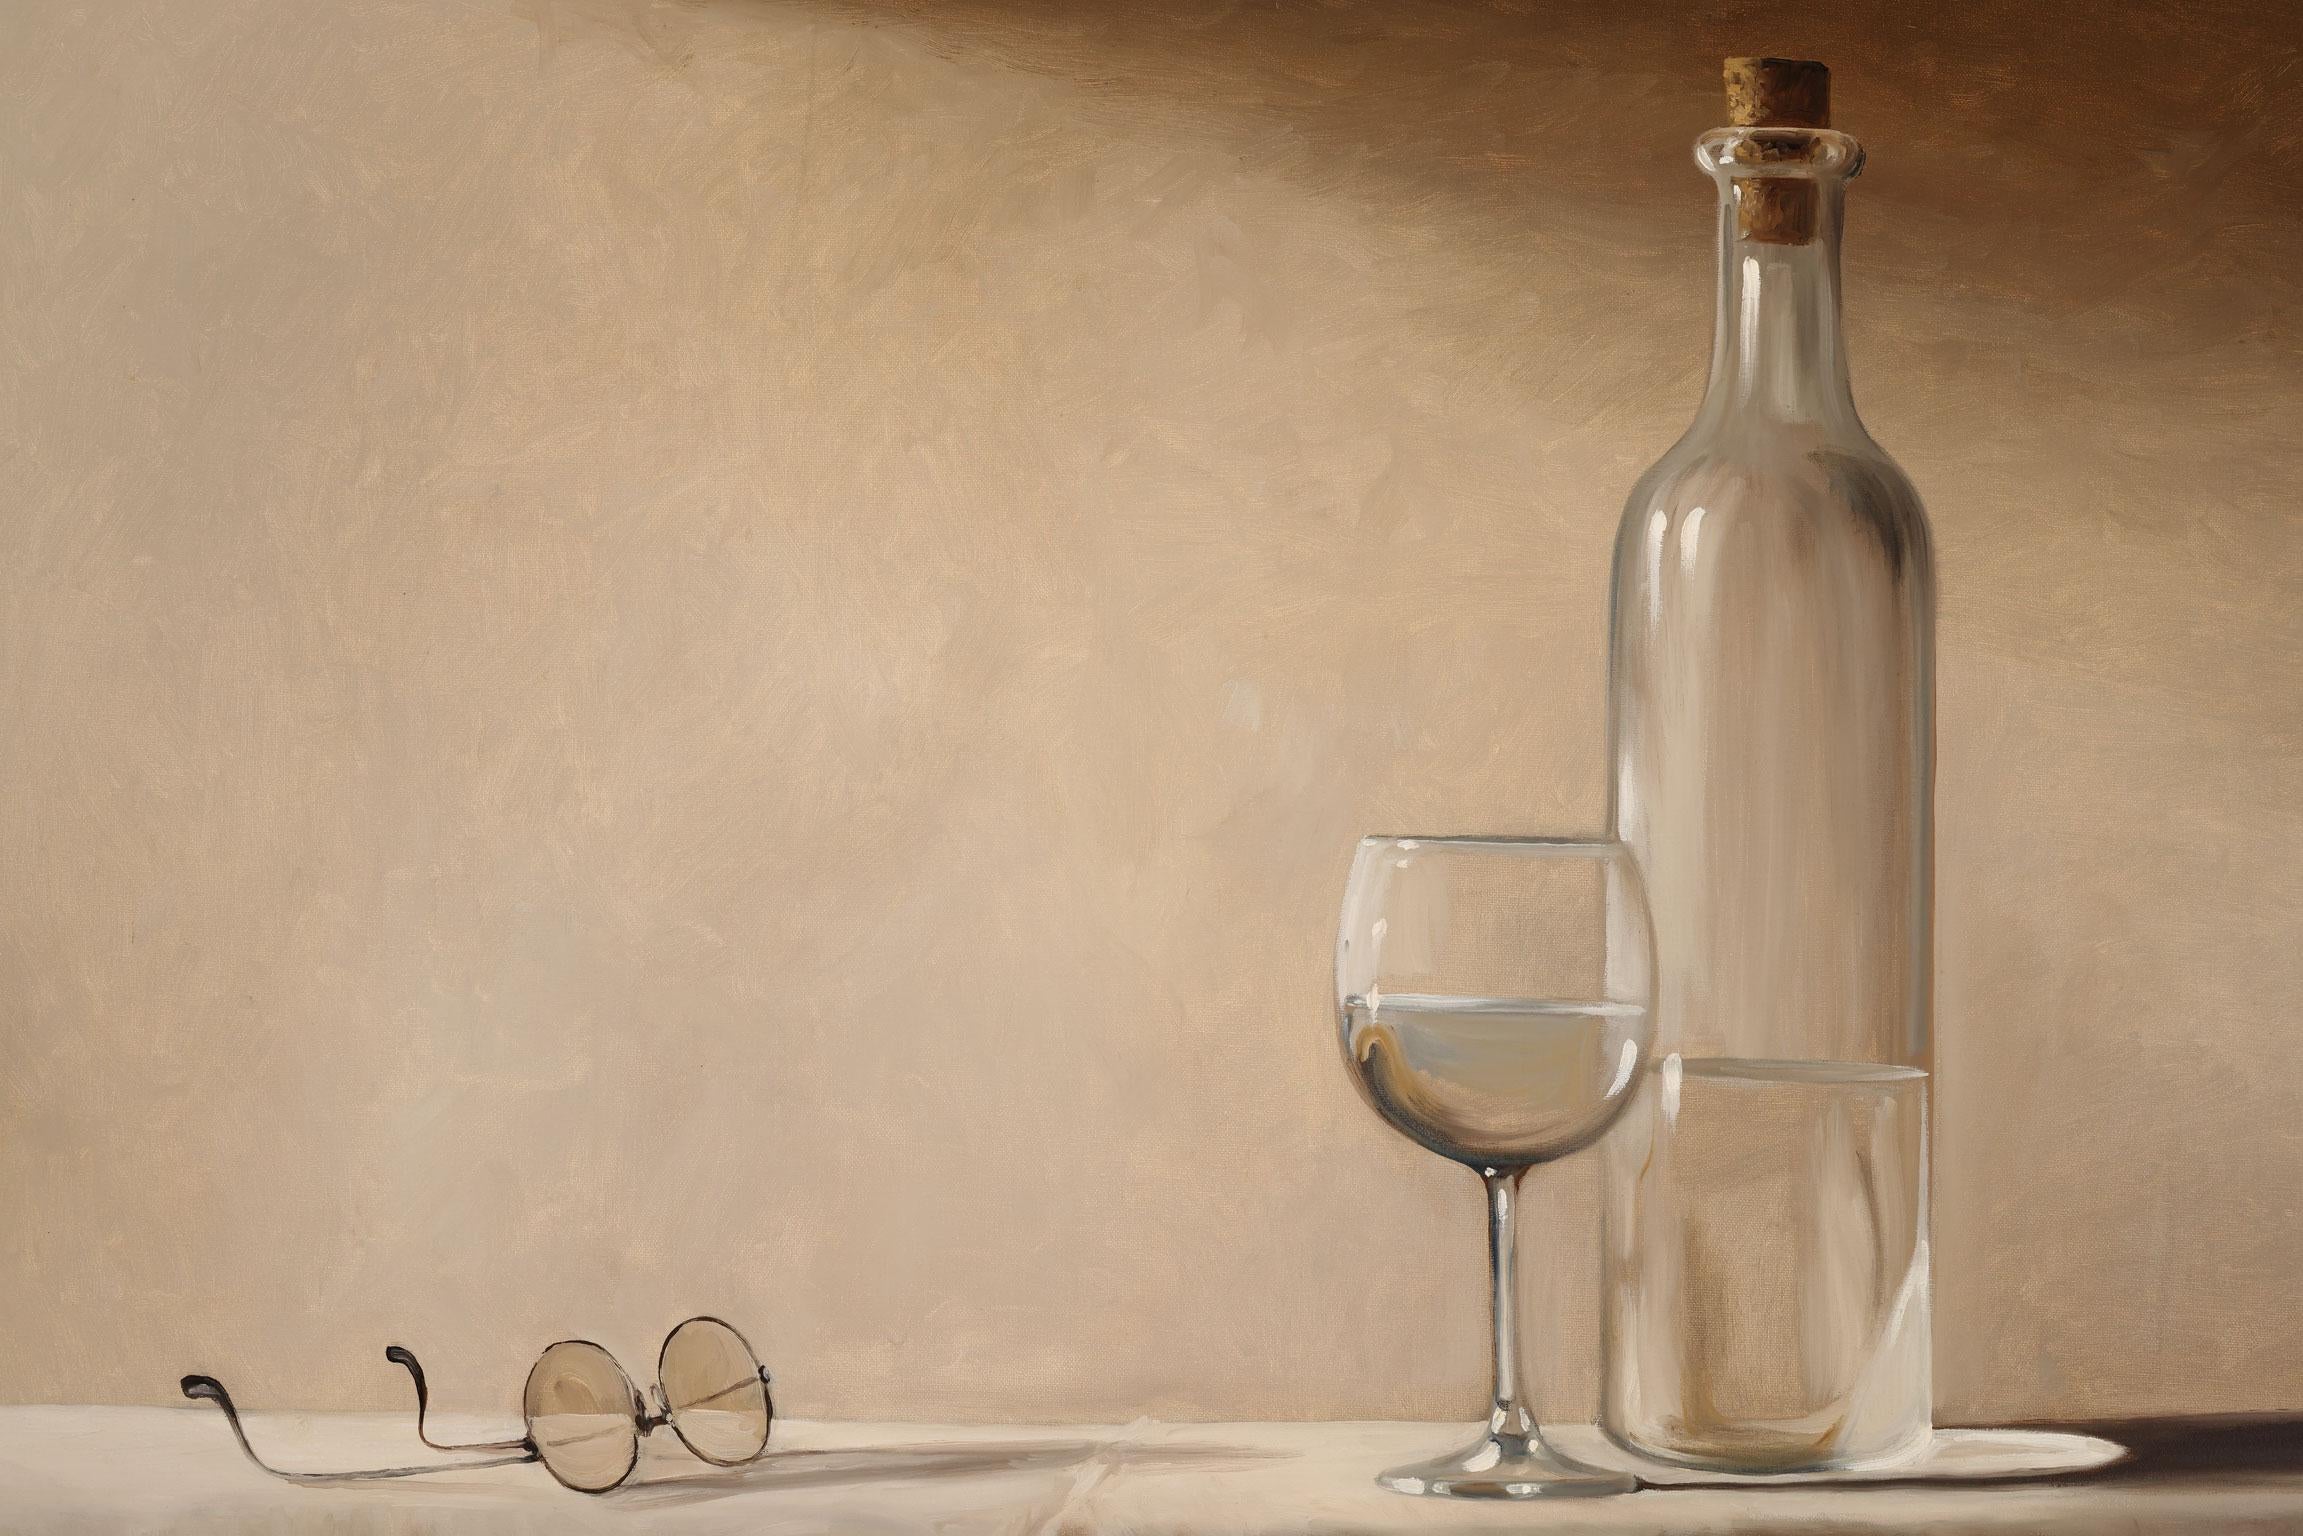 Untitled [Glasses], an original oil on canvas by Robert K. White, is a piece for the true collector. White’s careful attention to detail and vivid use of browns project from the painting, immediately capturing the viewer's attention and highlighting